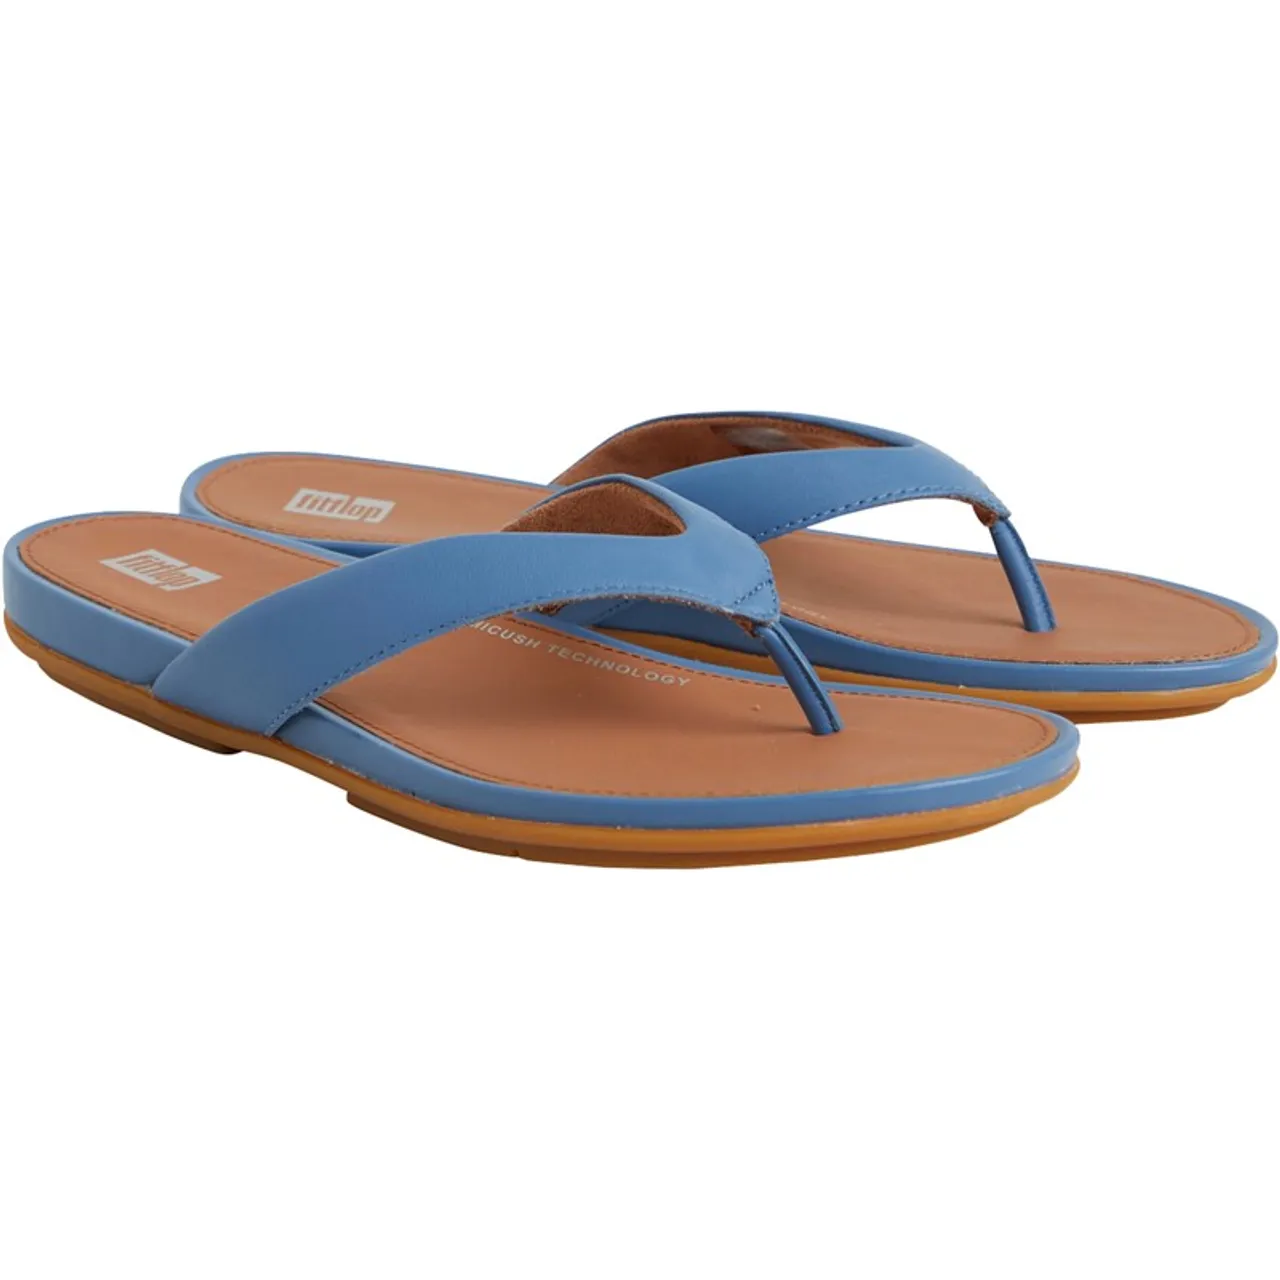 FitFlop Womens Gracie Leather Flip-Flops Sail Blue